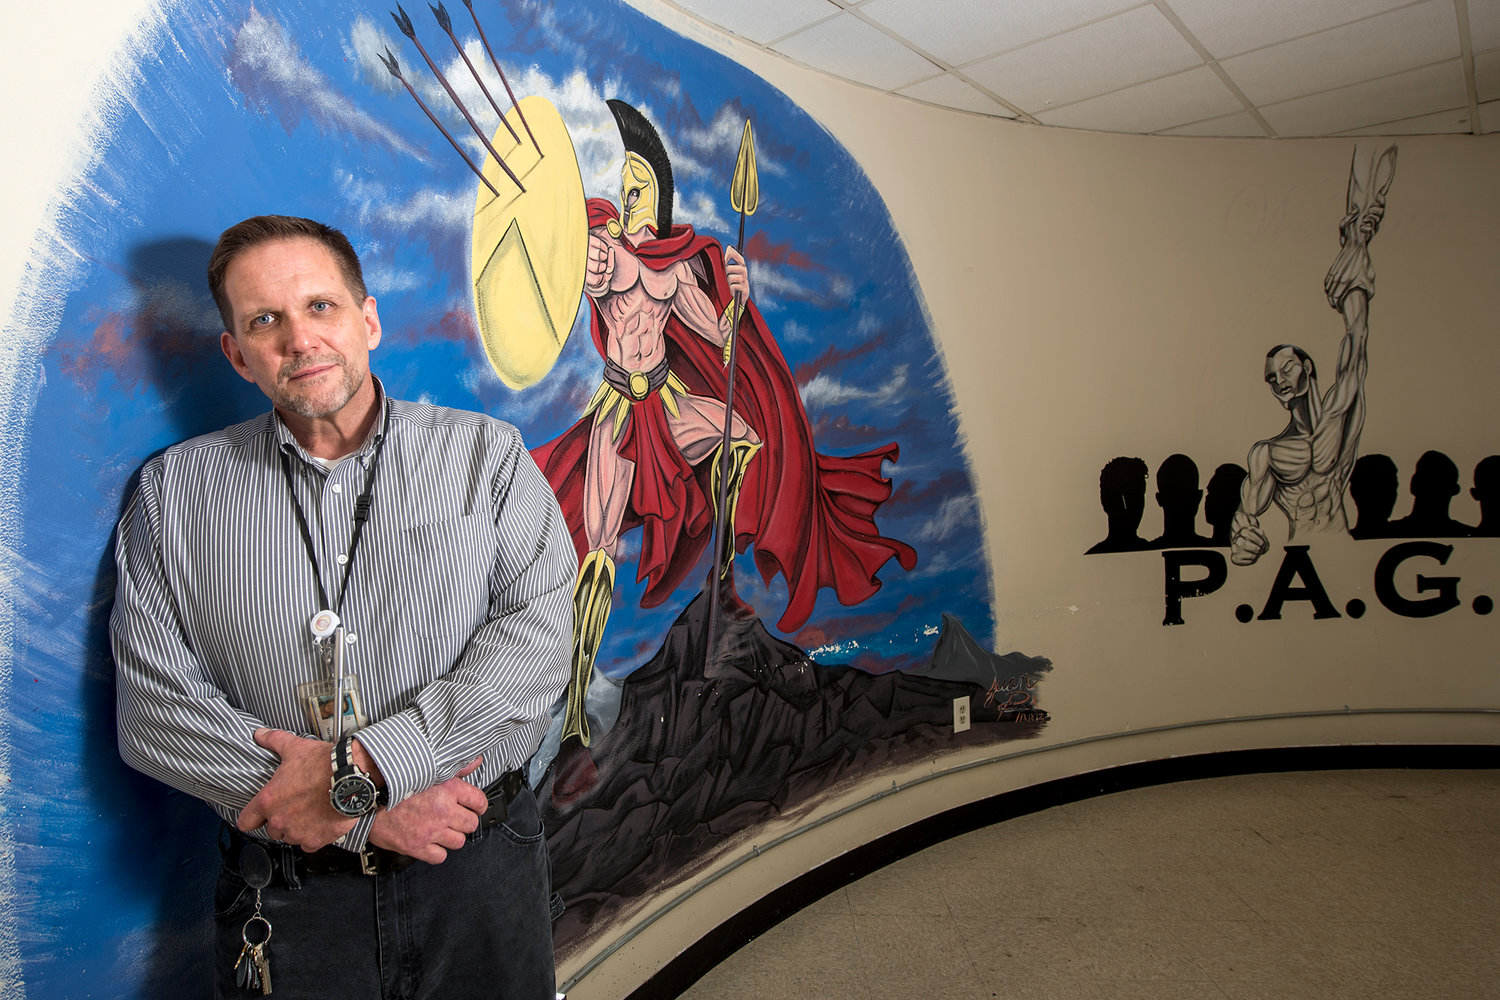 Martin Montague, the lead counselor at American Behavioral Health Systems, poses for a portrait in front of a painting of a Spartan on Wednesday afternoon in one of the meeting rooms at the Chehalis facility. Five years ago when Montague asked his clients to name their group, they came up with Martin's Spartans. Montague explained that he has always thought his clients chose Spartans because of their battles with addiction.